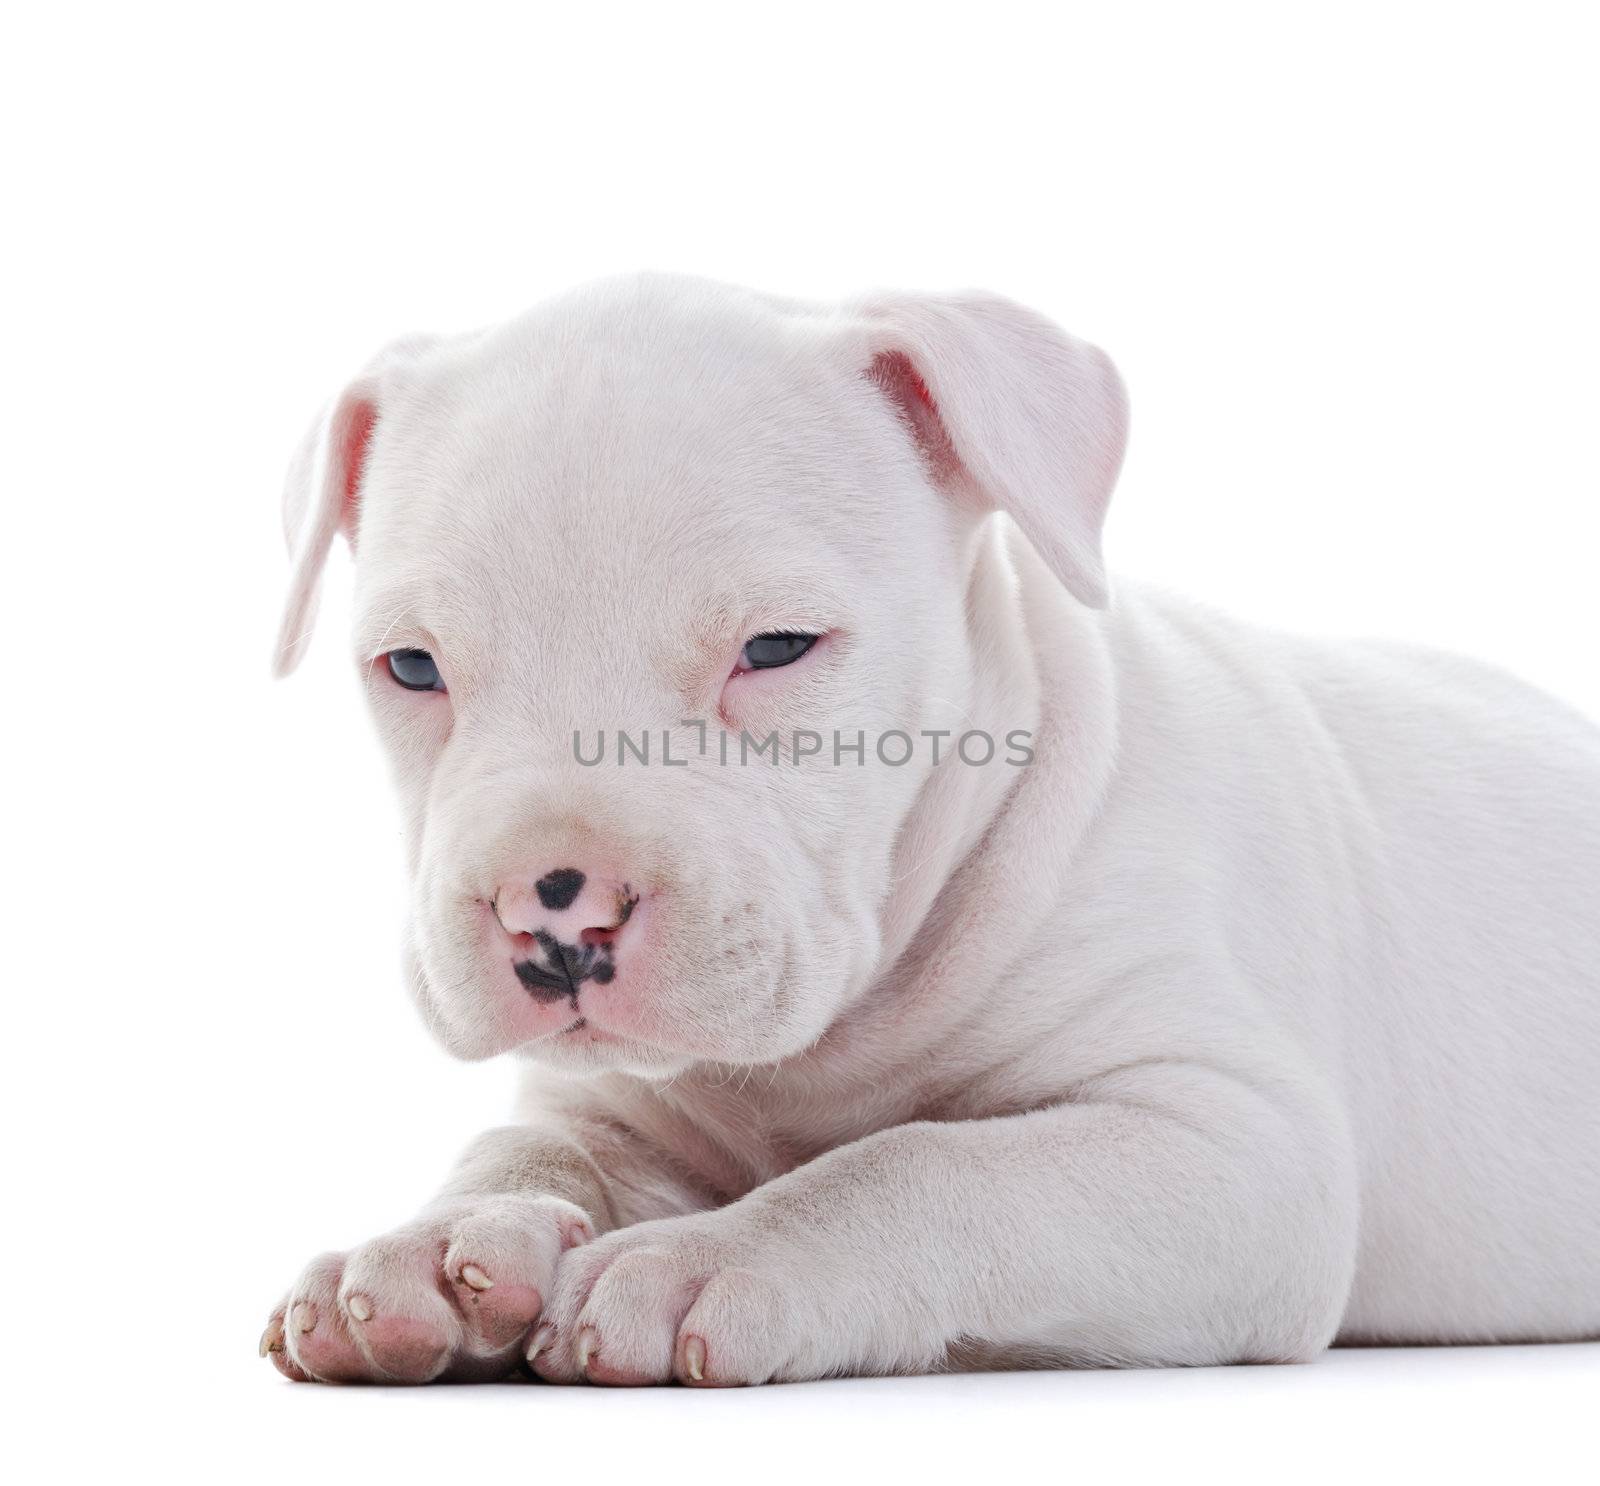 American Staffordshire Terrier by milinz